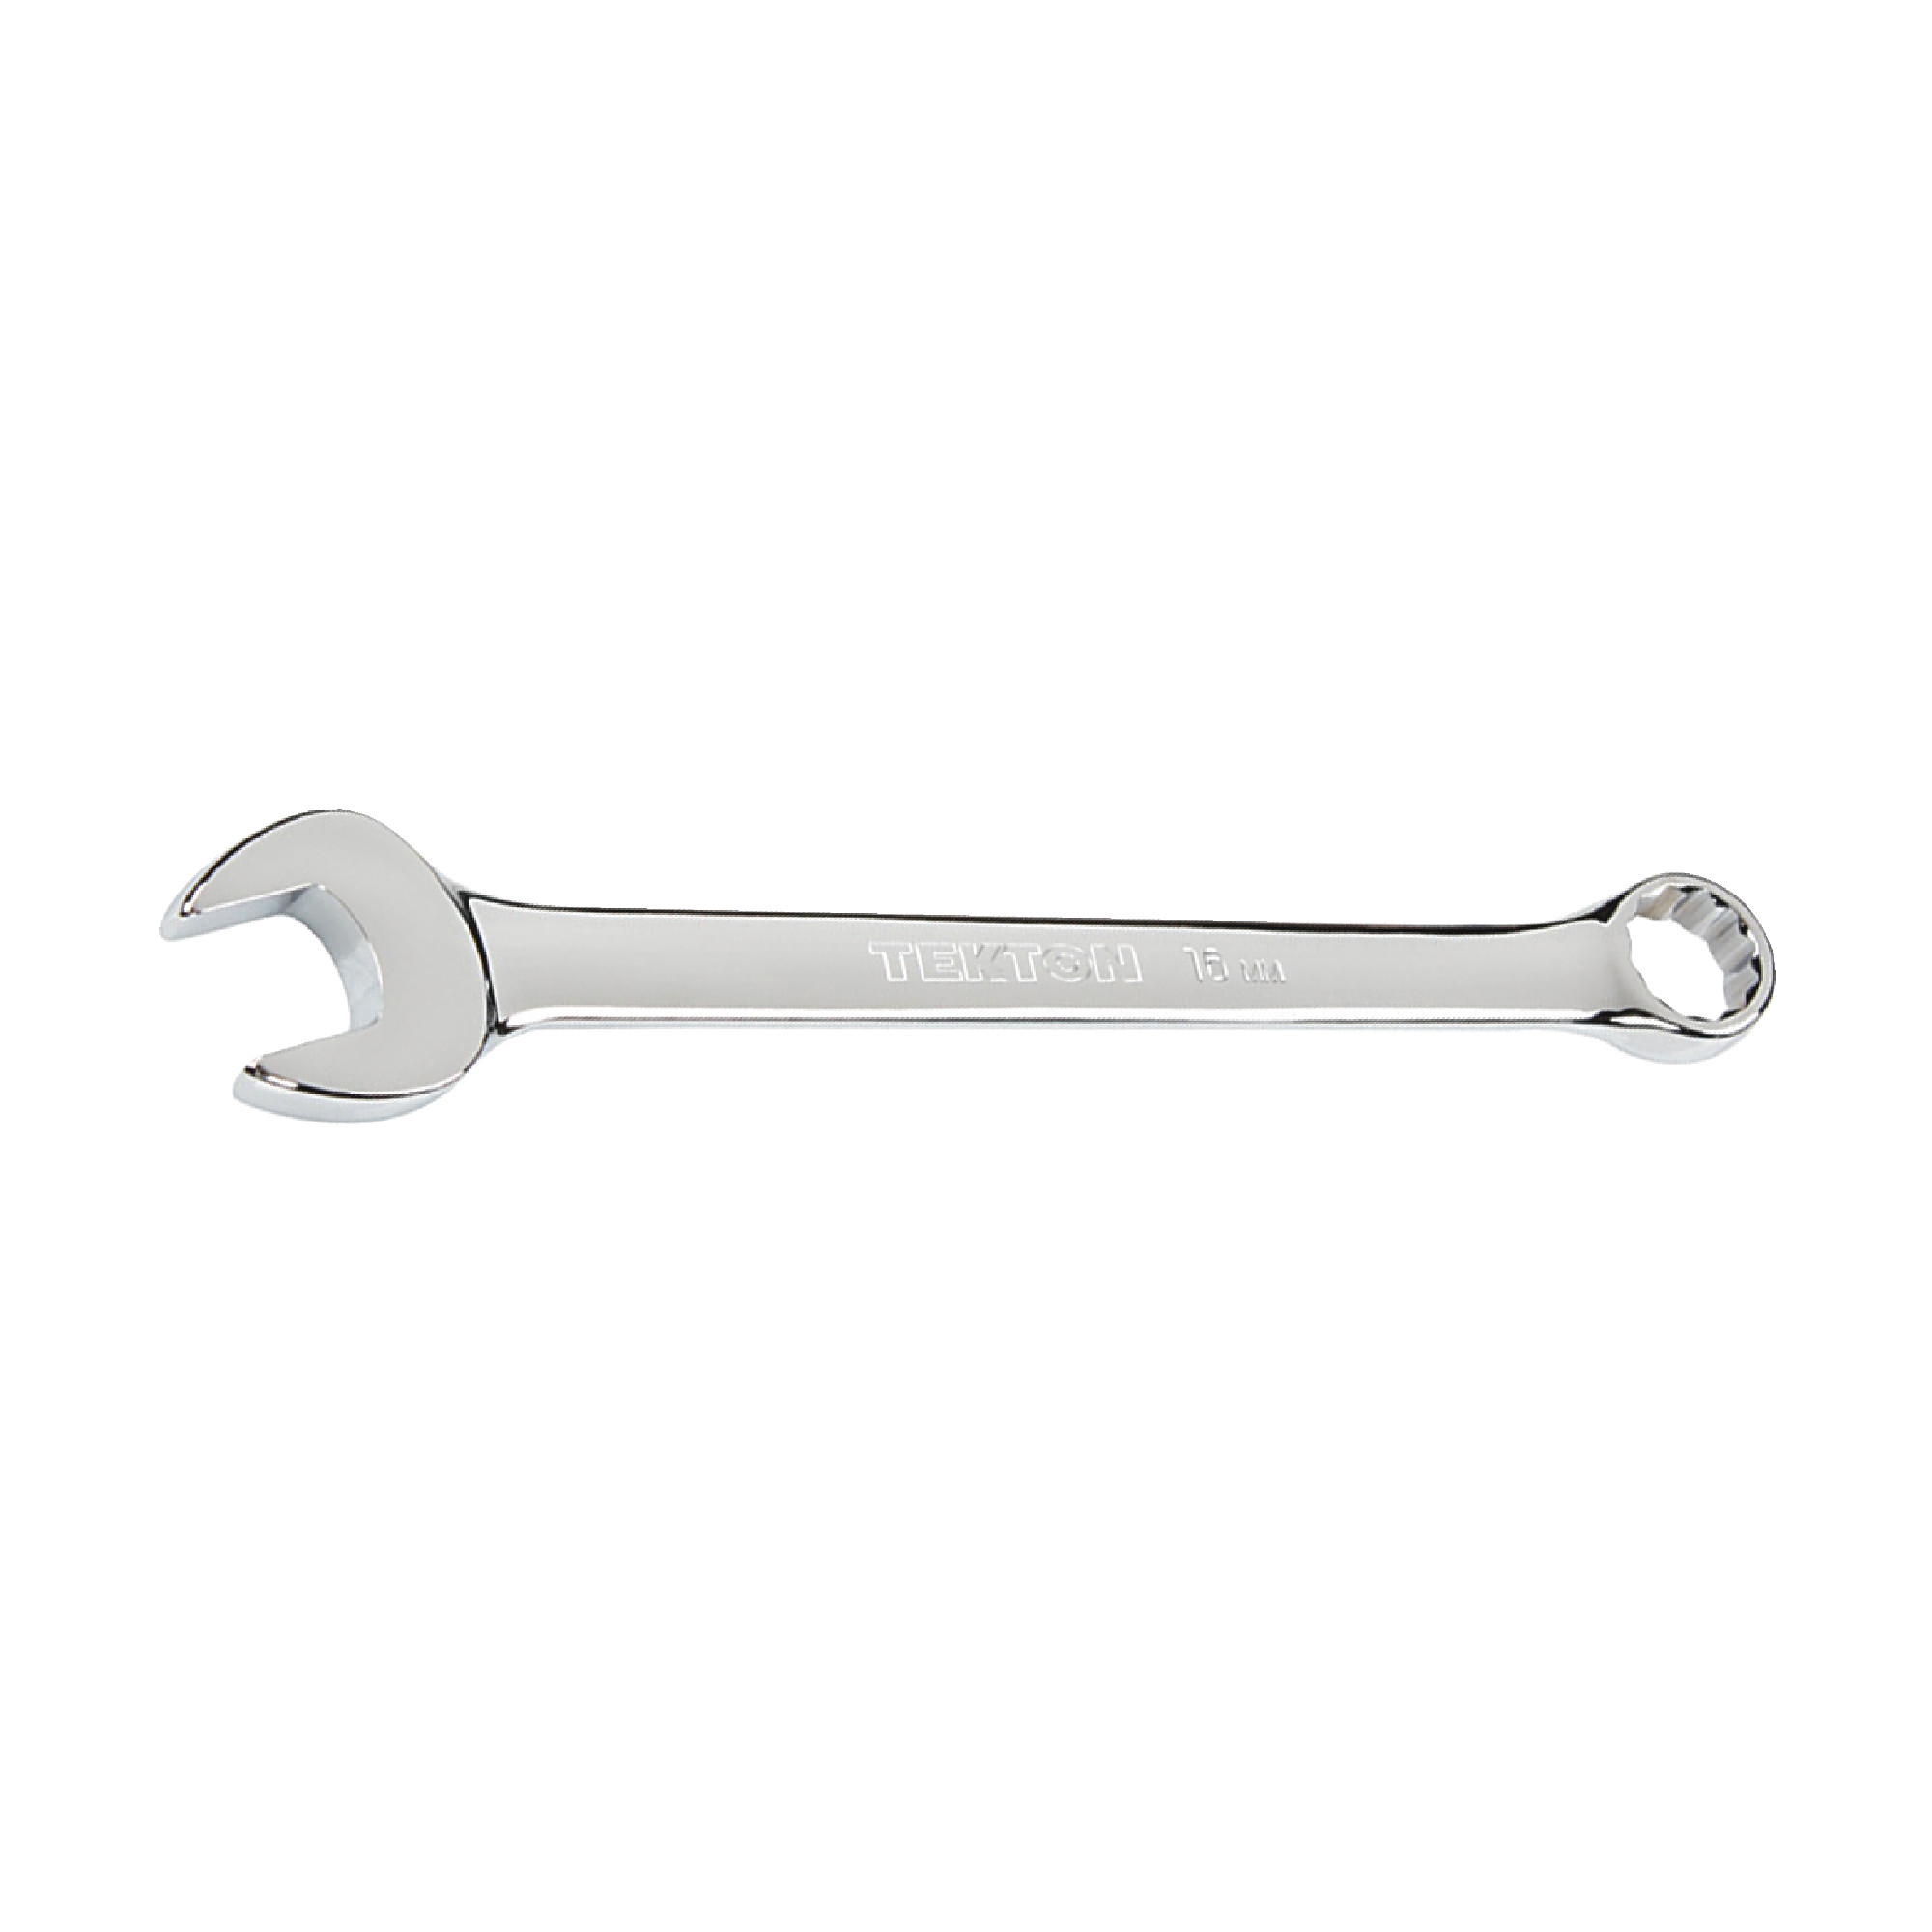 Mirror Chrome Plated 15mm Metric Combination Wrench